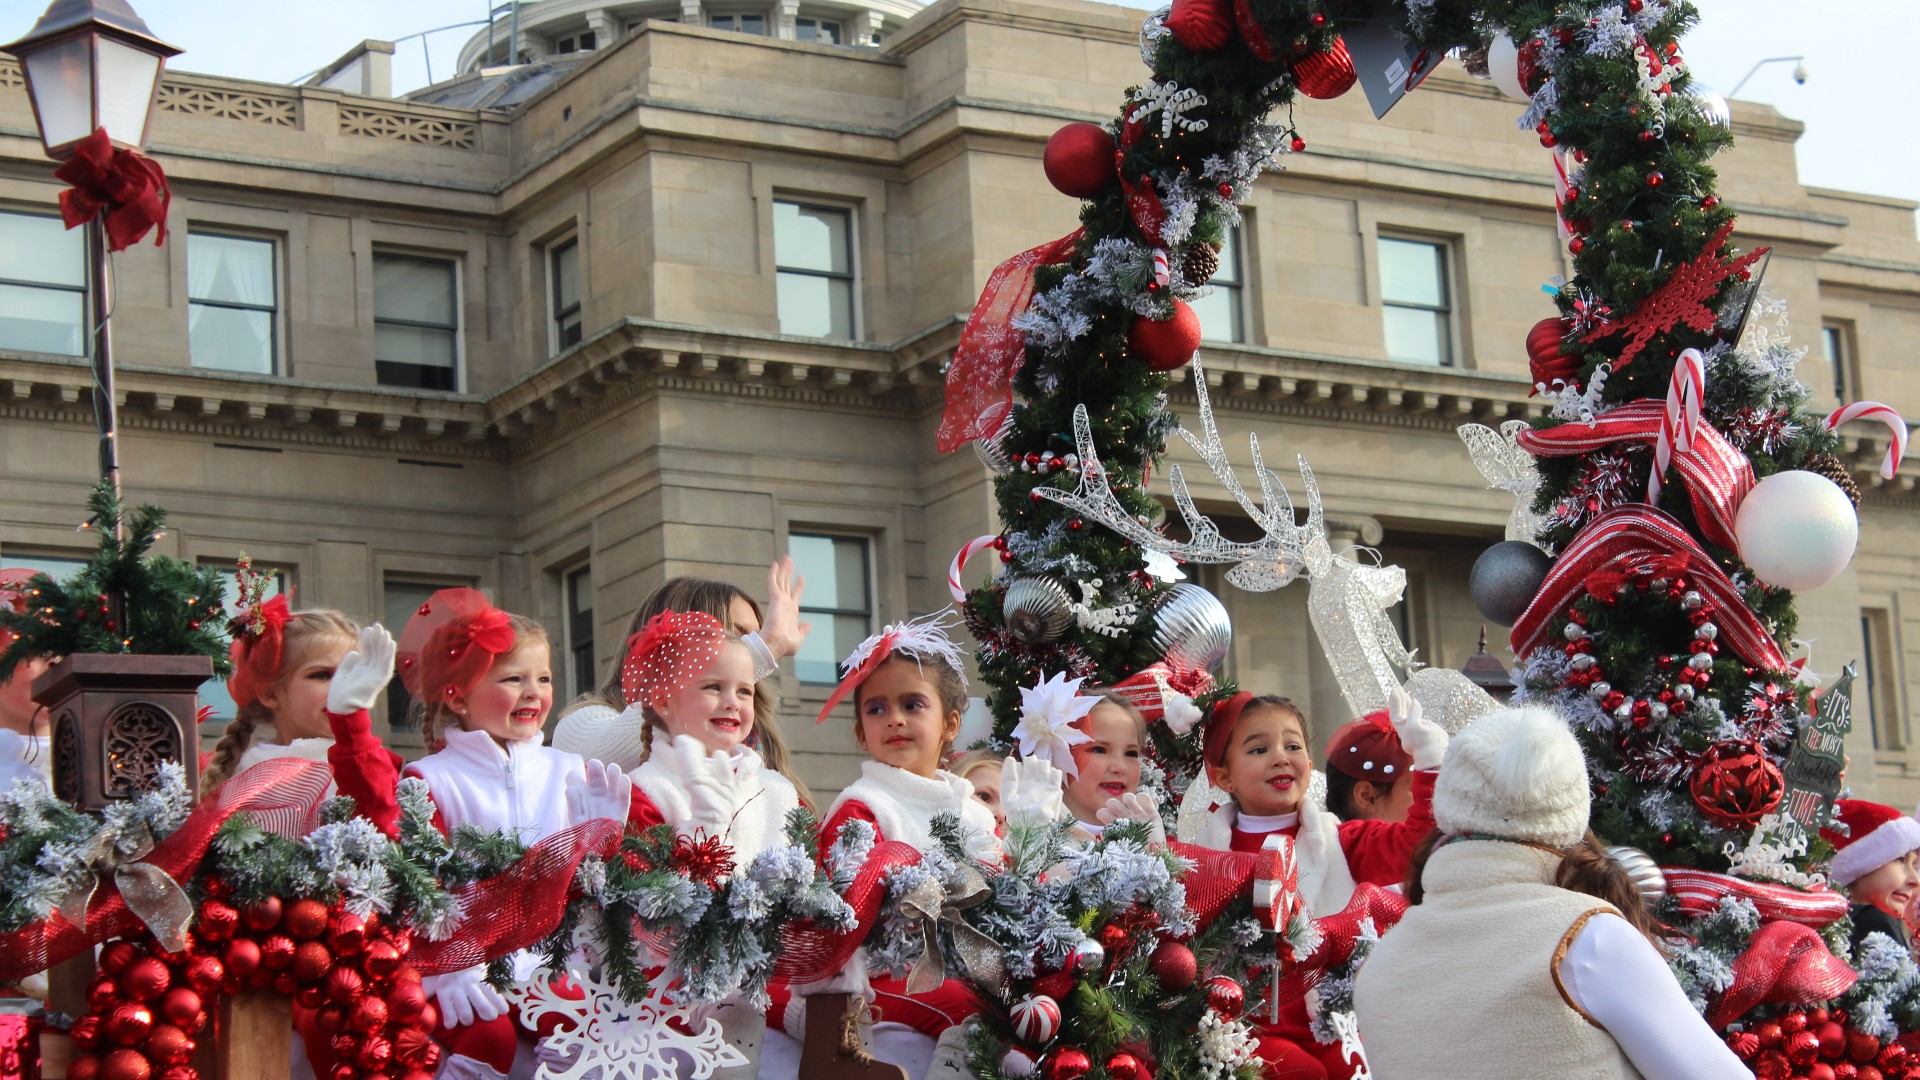 Watch Boise Holiday Parade present 'The Most Wonderful Time of the Year